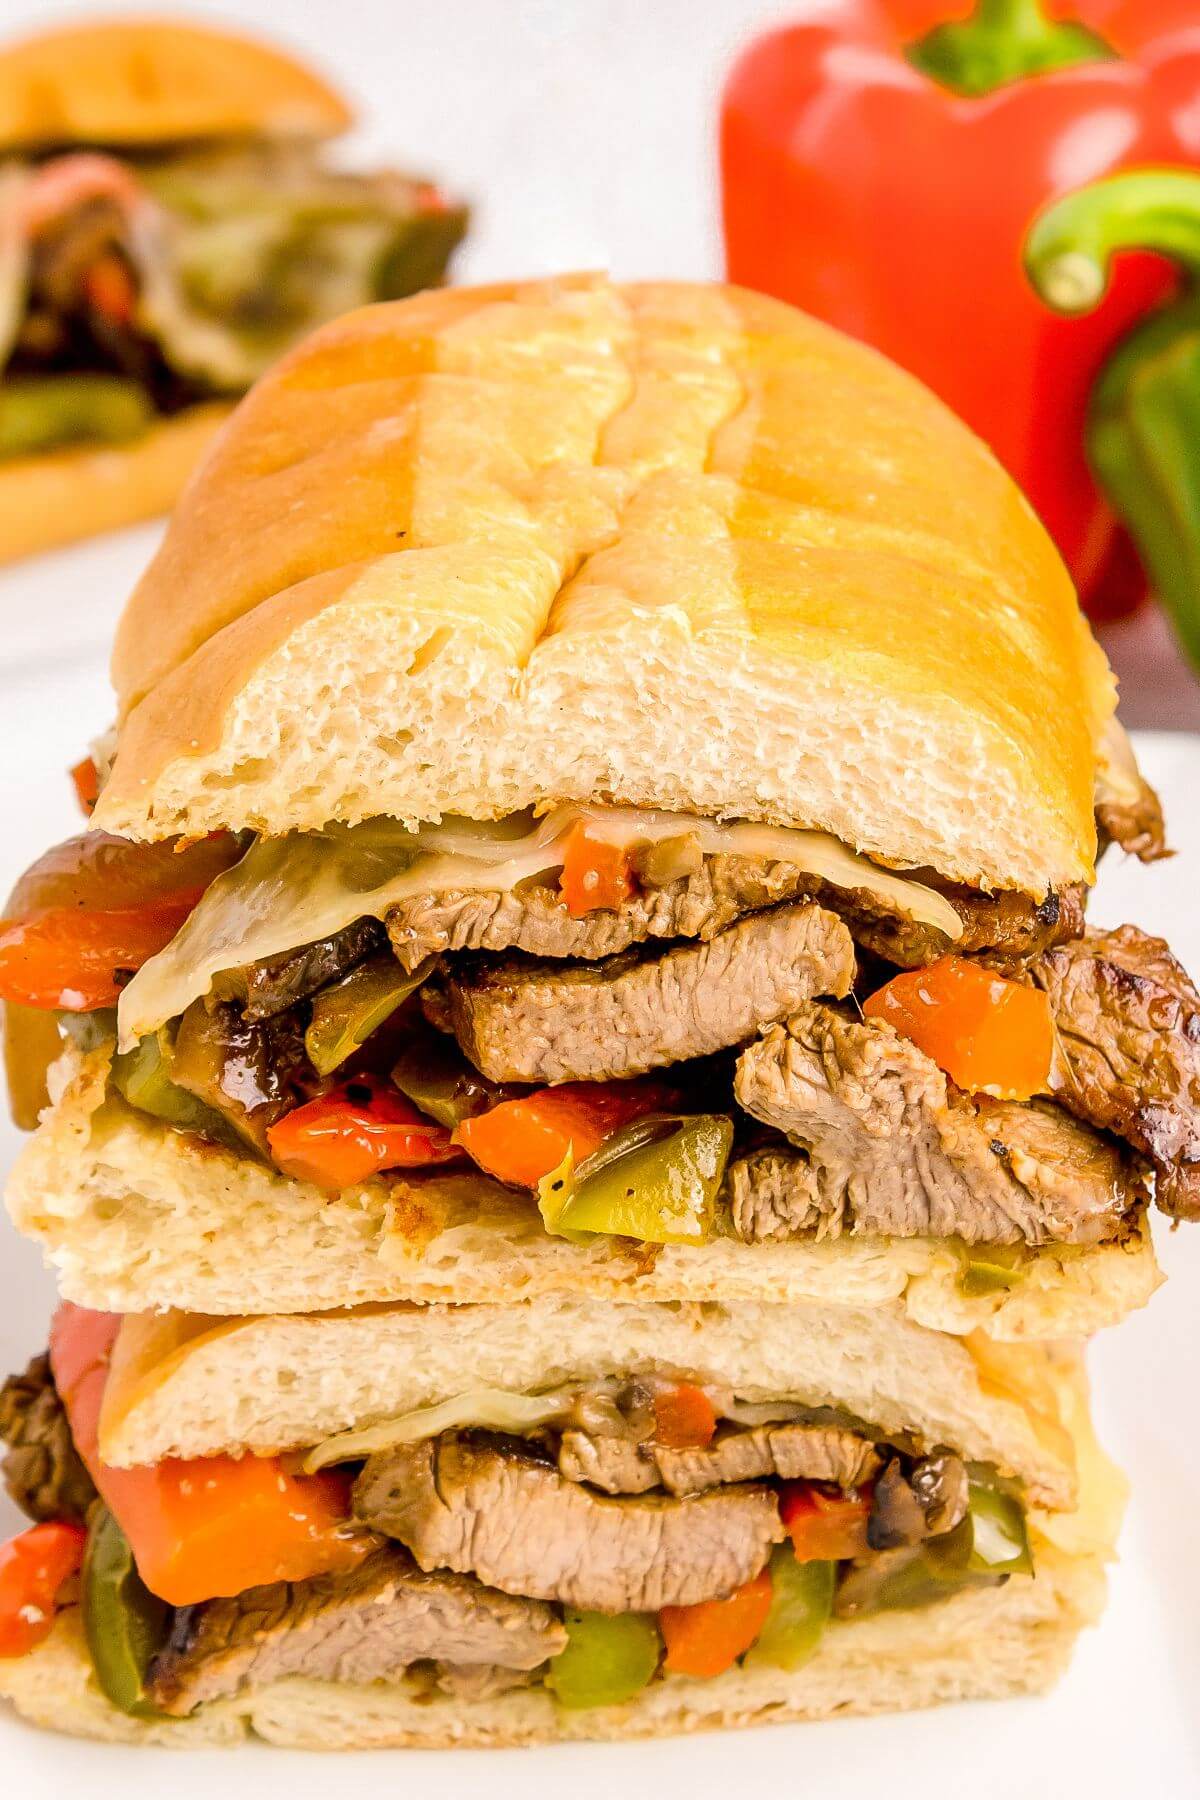 Sandwiches are stacked on each other to show all the fresh ingredients inside.